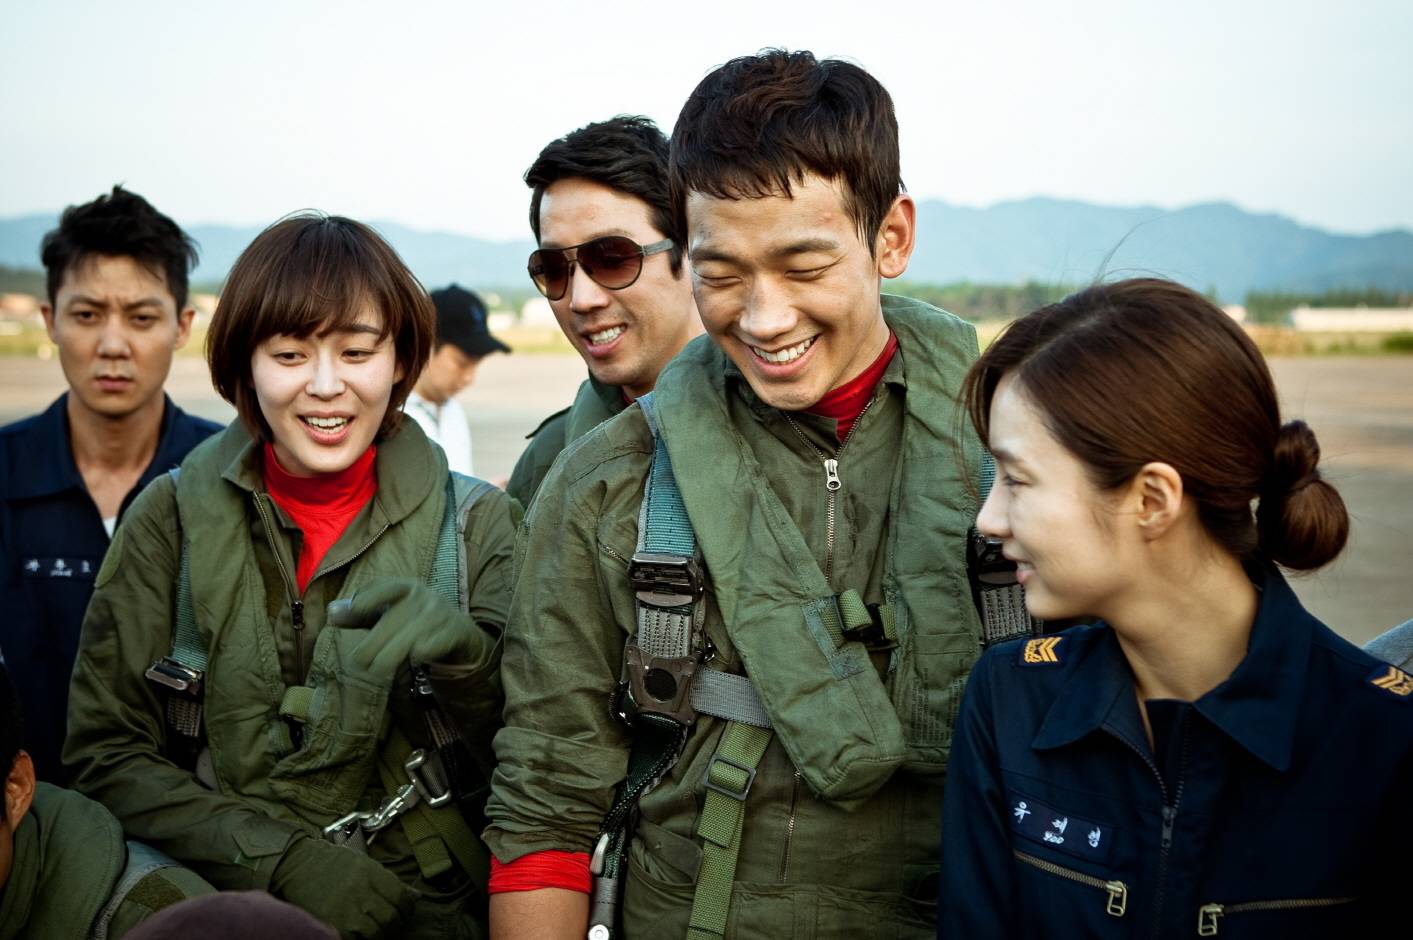 [Video] Added new images and video for the upcoming Korean movie "R2B